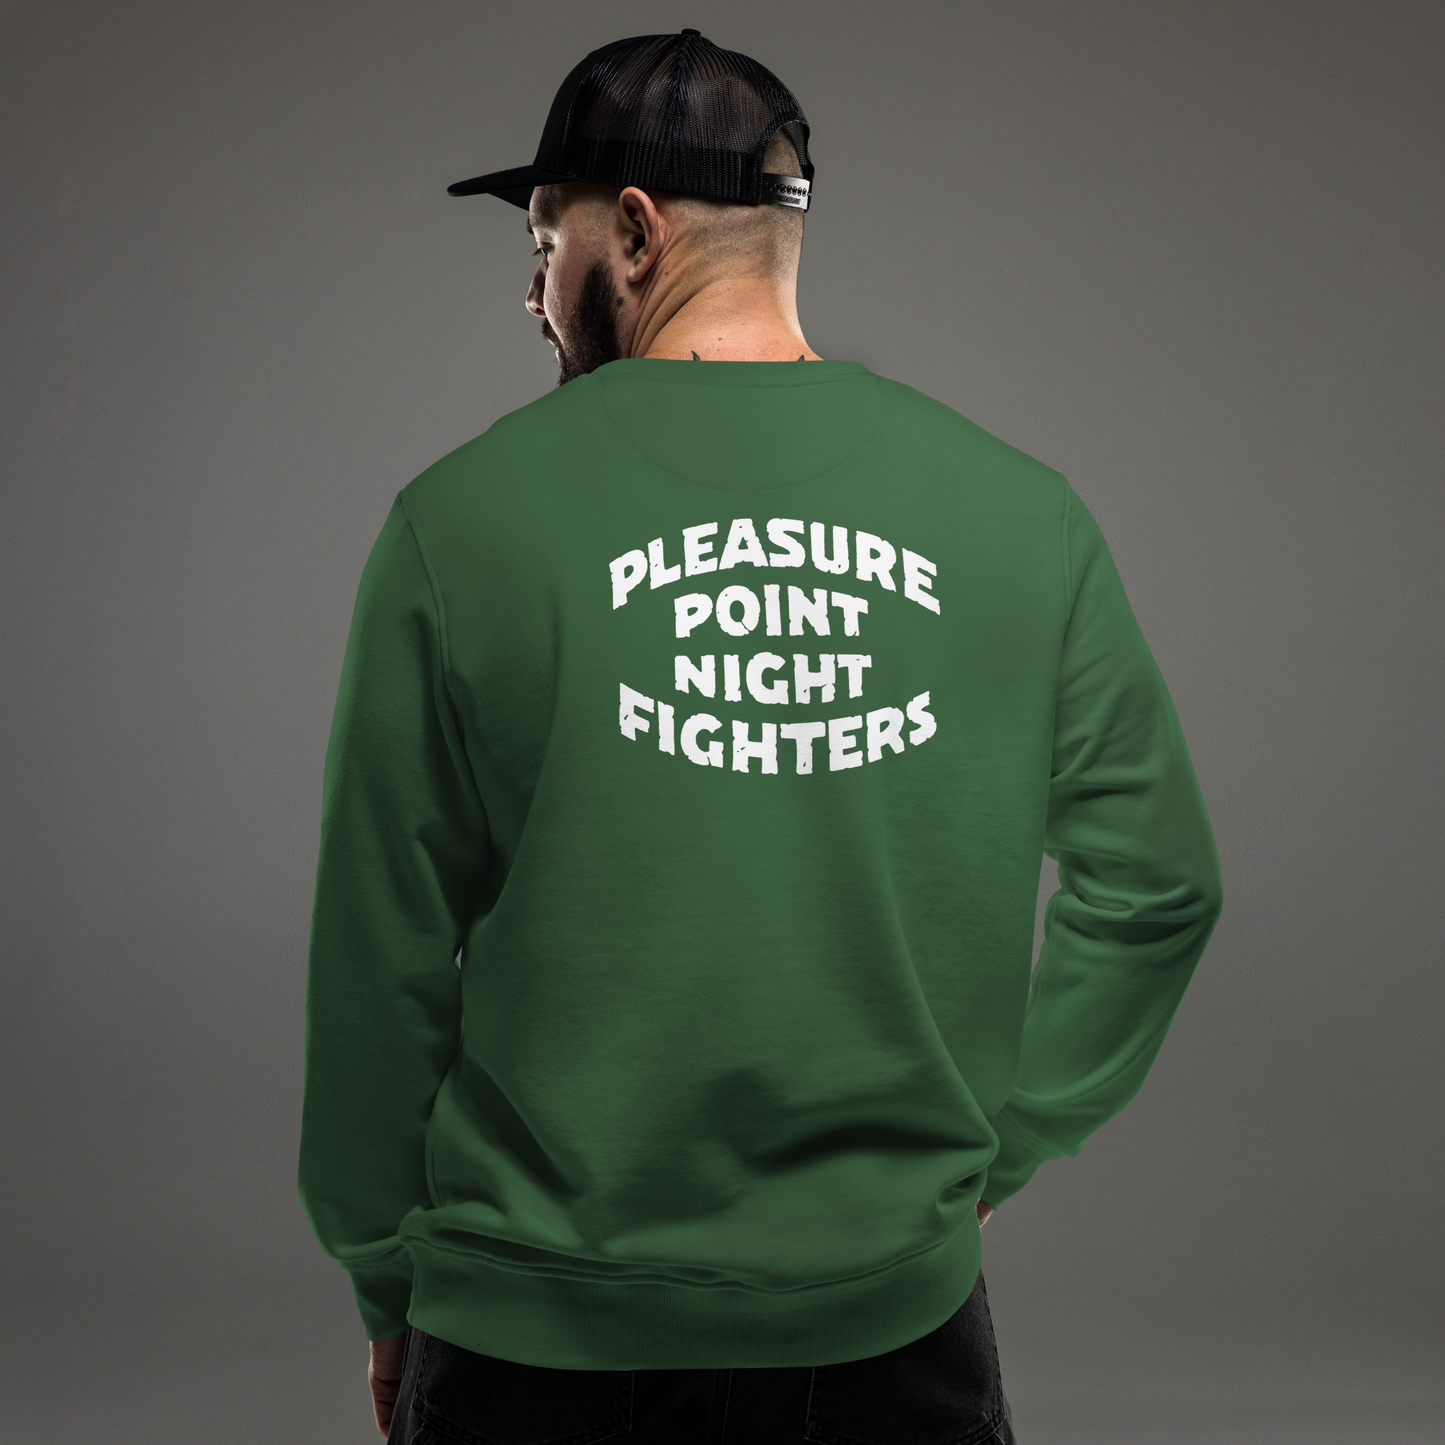 PPNF Custom - Limited Time - Pleasure Point Night Fighters - Unisex organic sweatshirt - MEMBERS ONLY